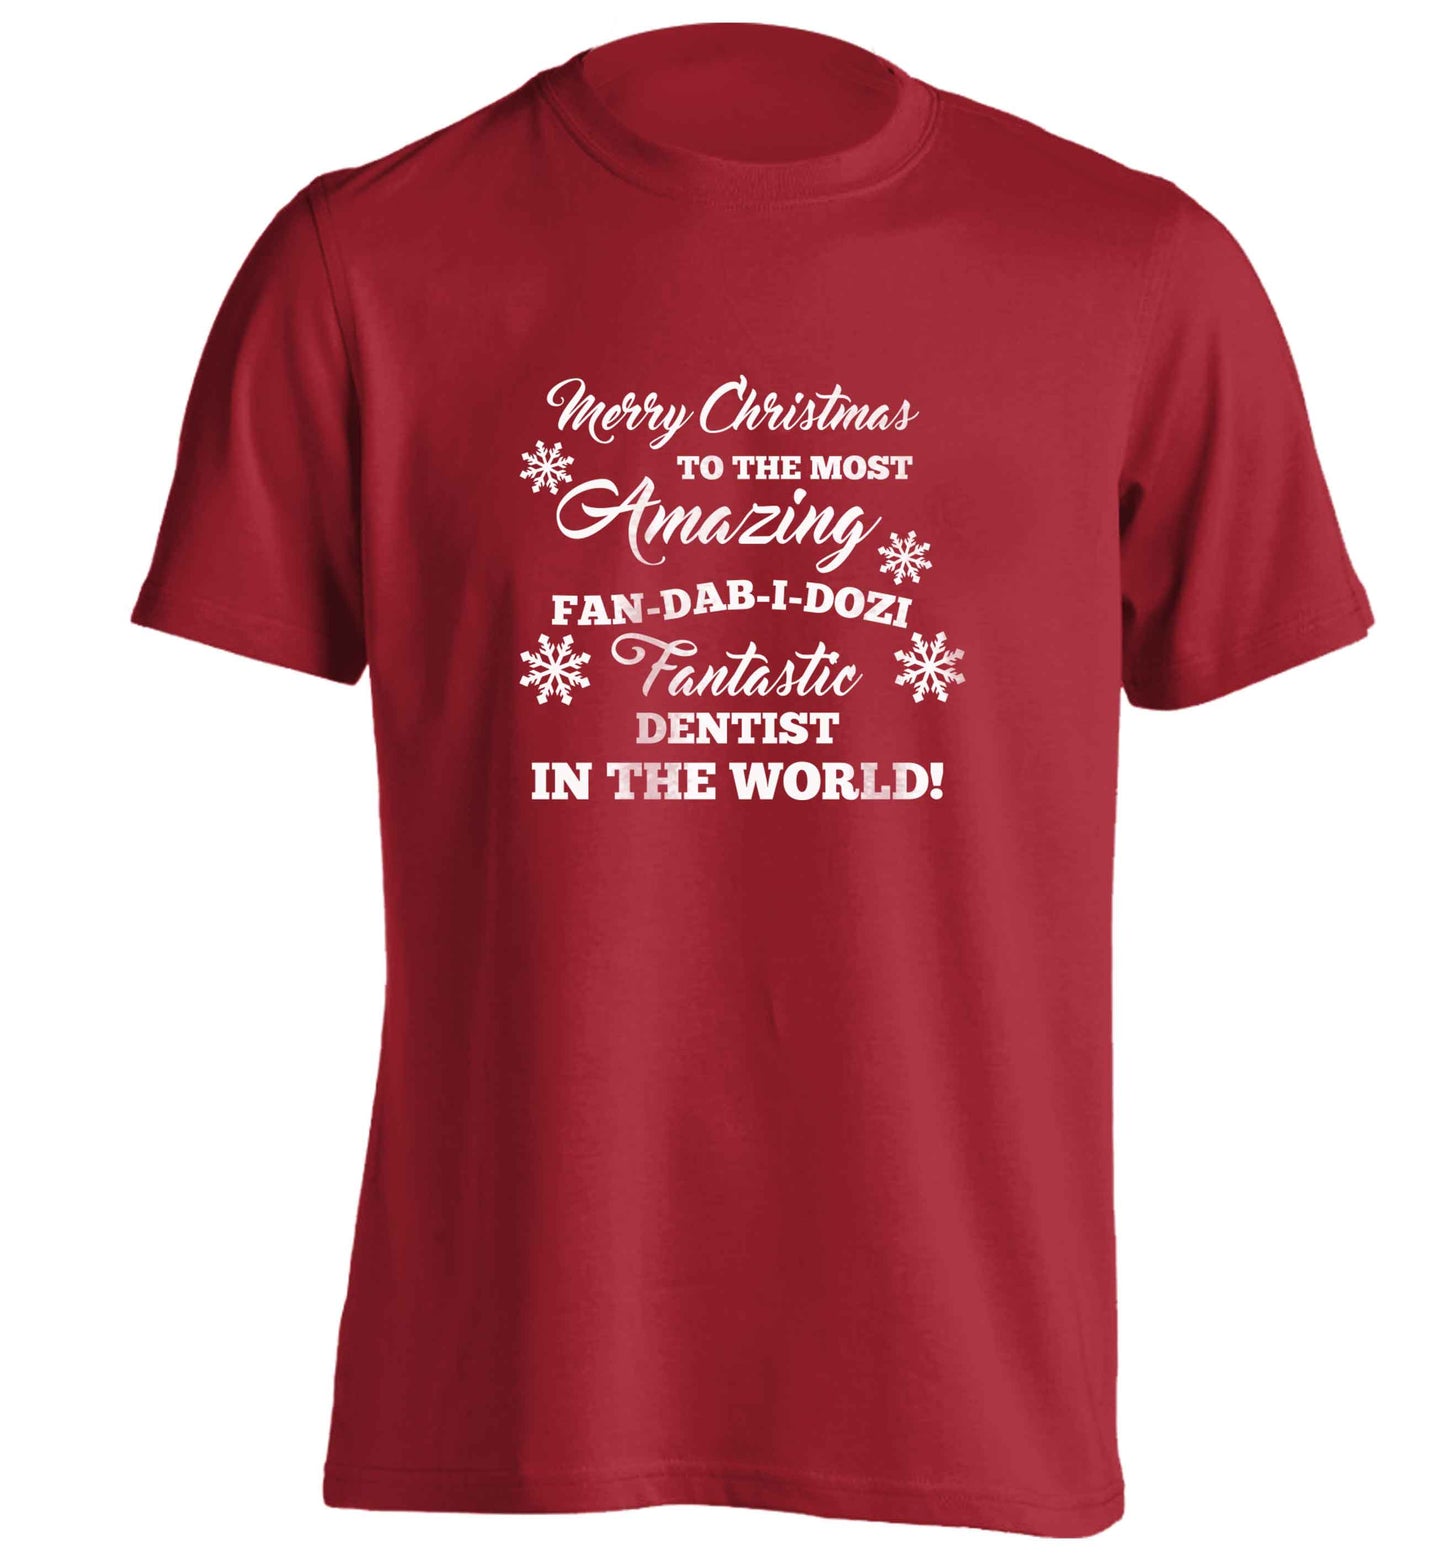 Merry Christmas to the most amazing dentist in the world! adults unisex red Tshirt 2XL